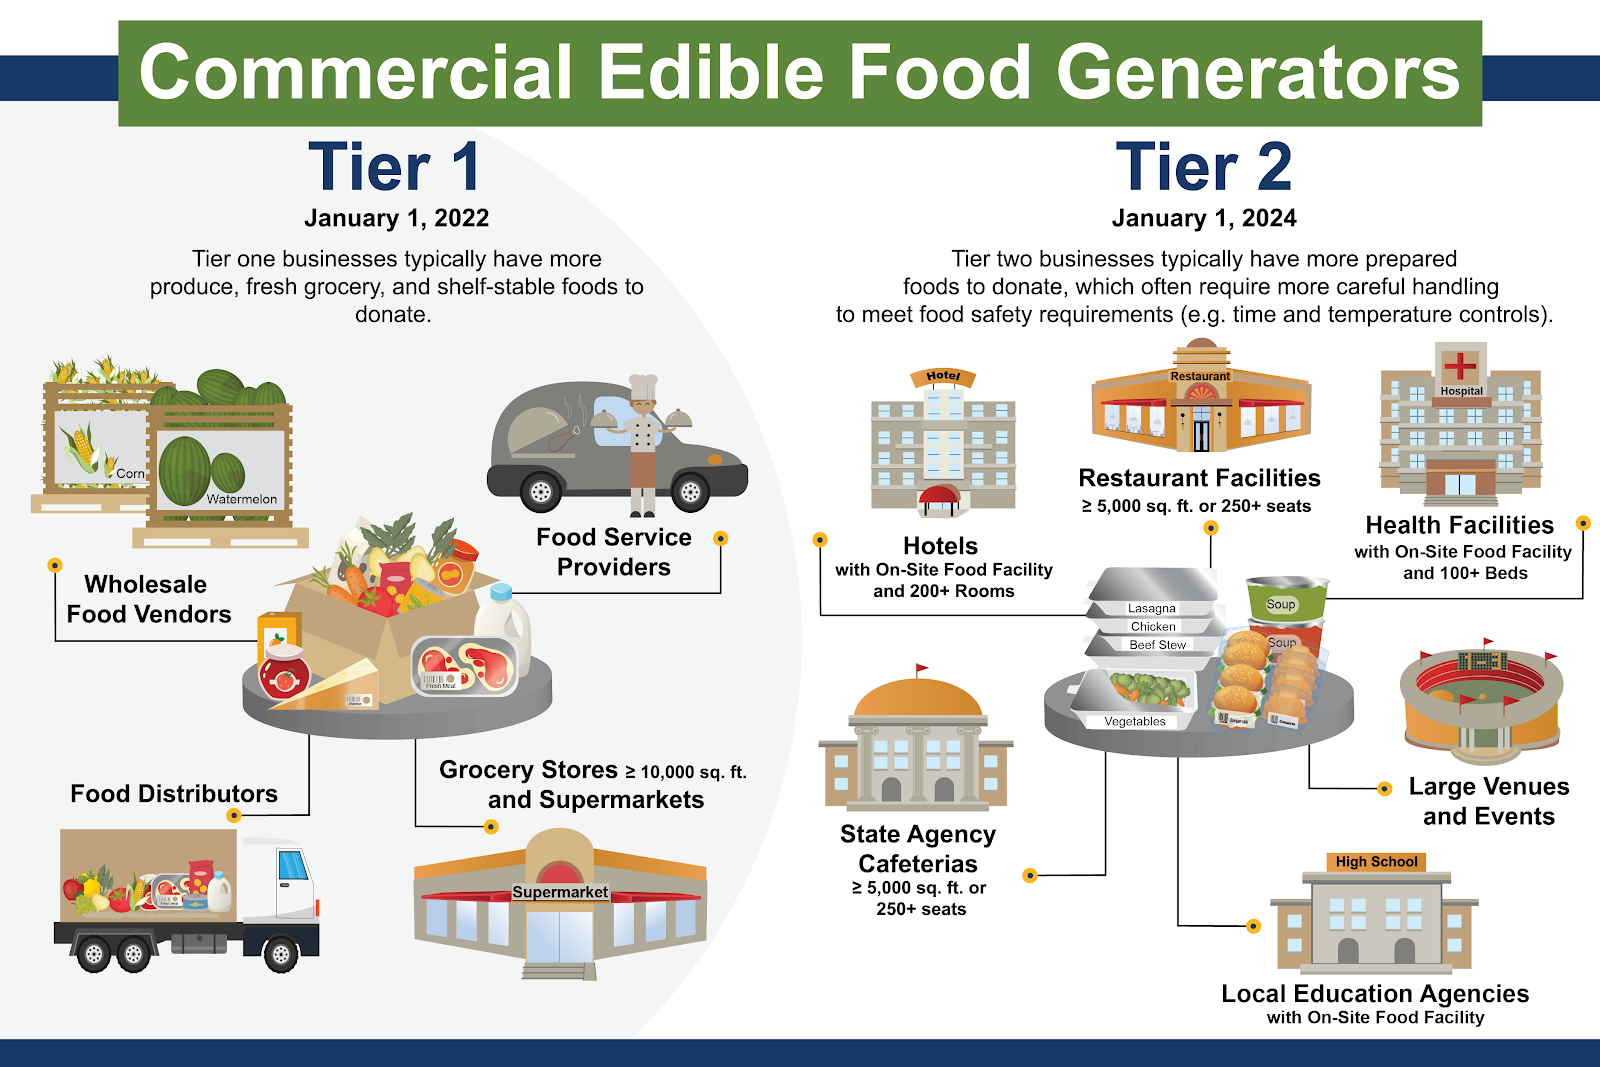 DEFINING TIER ONE AND TIER TWO COMMERCIAL EDIBLE FOOD GENERATORS